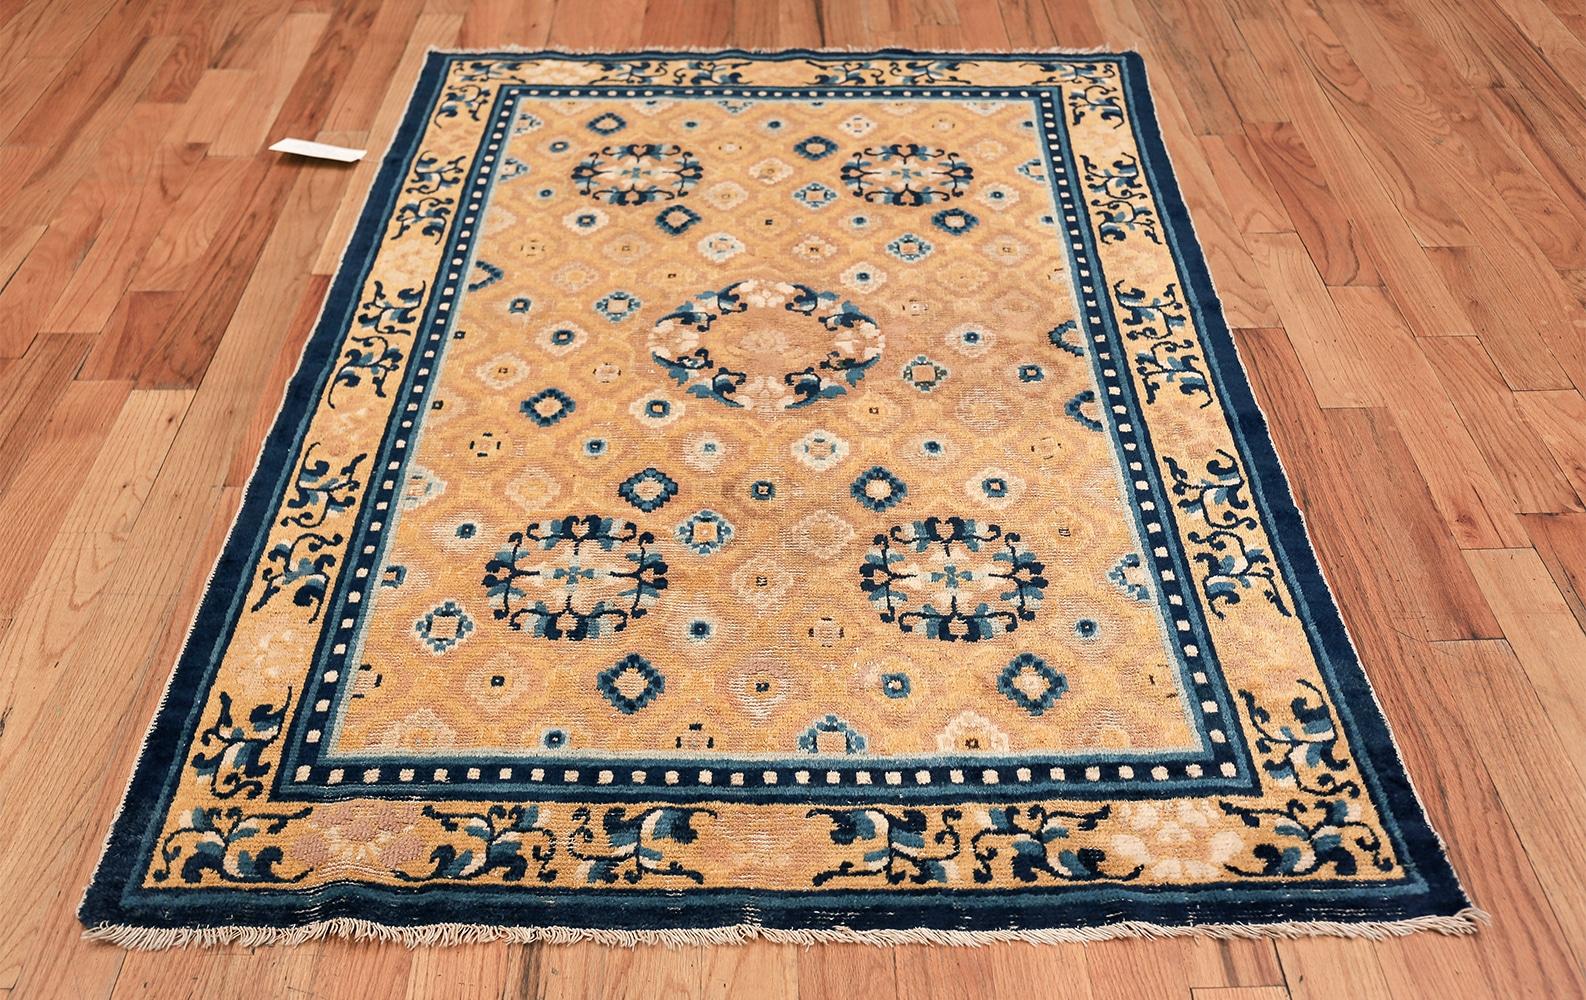 Nazmiyal Collection Mid-19th Century Chinese Ningxia Rug. 4 ft x 6 ft 4